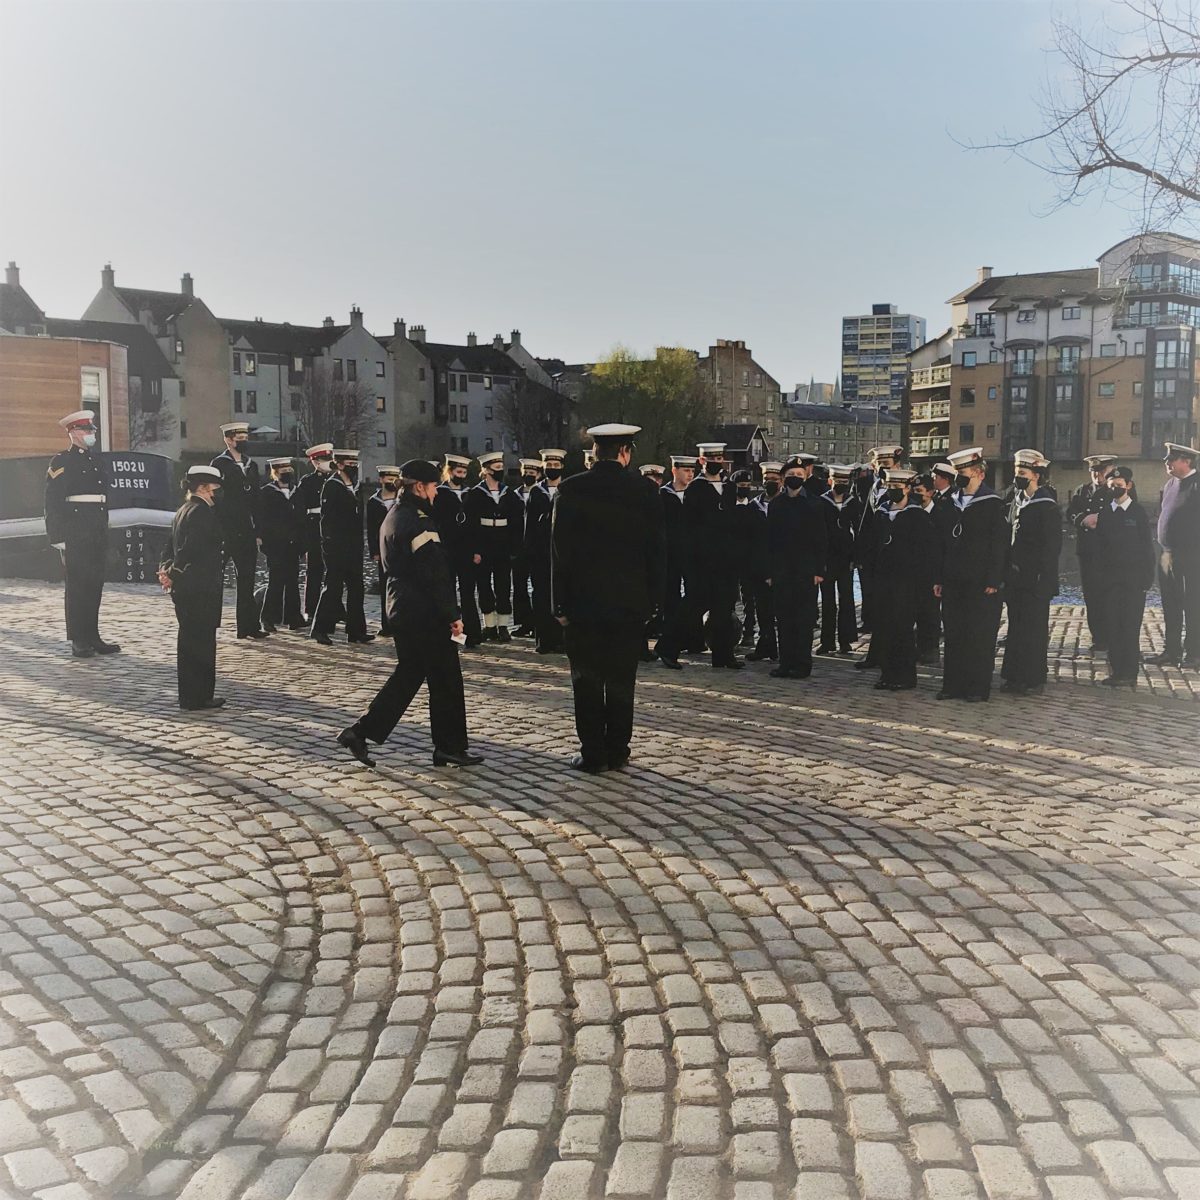 Leith Sea Cadets are dismissed from parade - Leith Shore 21 November 2021 © Gordon Munro